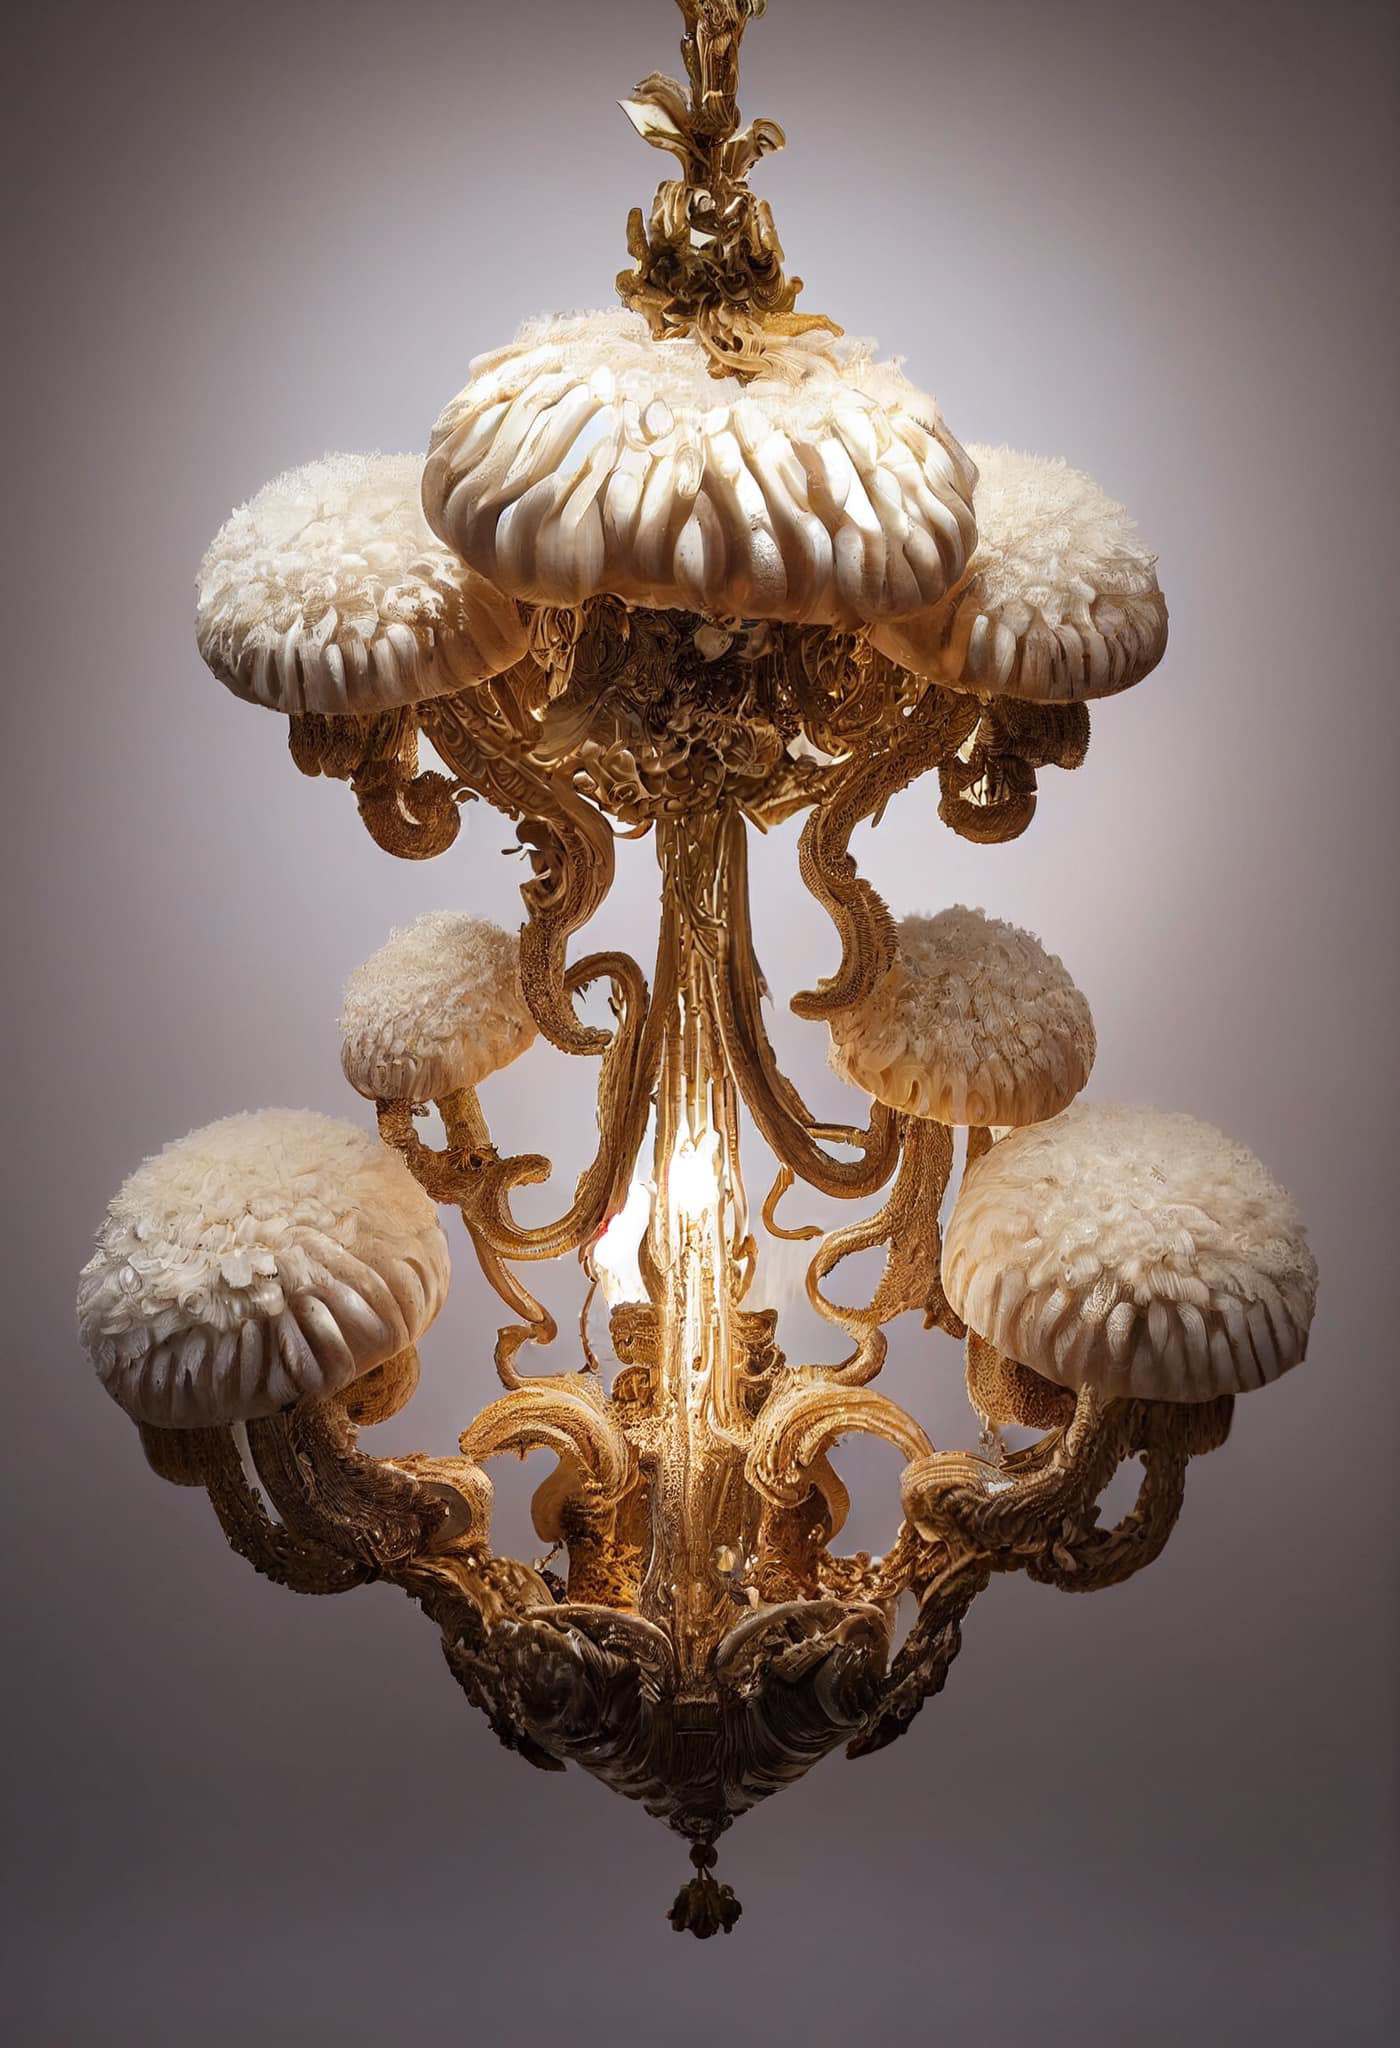 Mushroom Magic: Illuminating Spaces with the Enchantment of Mushroom-Inspired Chandeliers